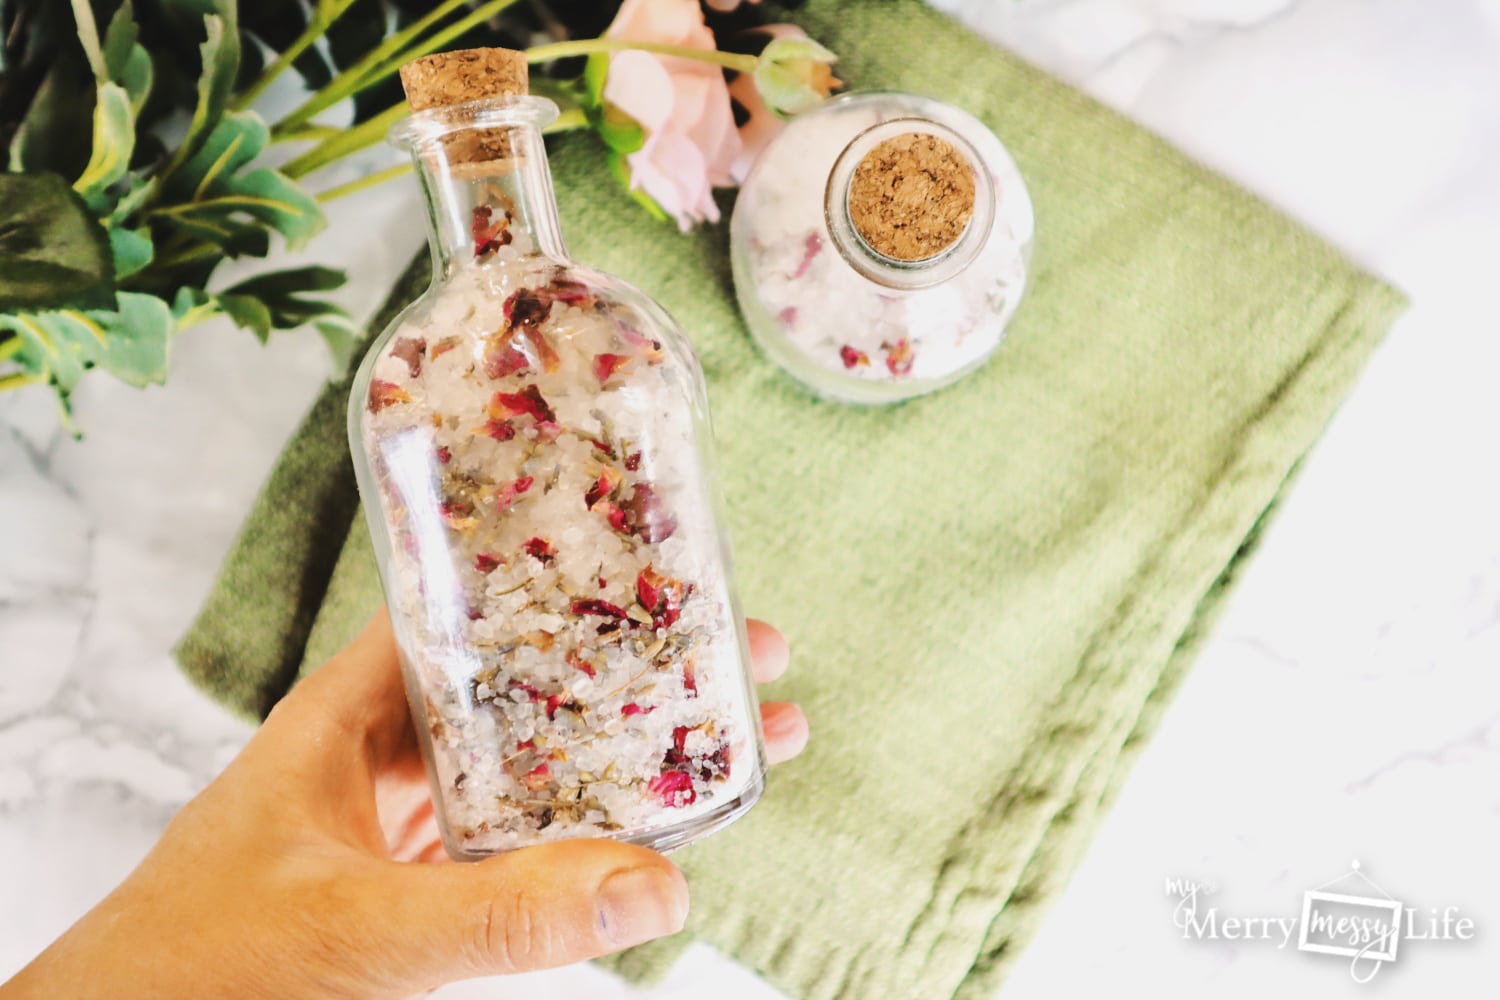 Homemade bath salts recipe with rose and lavender petals